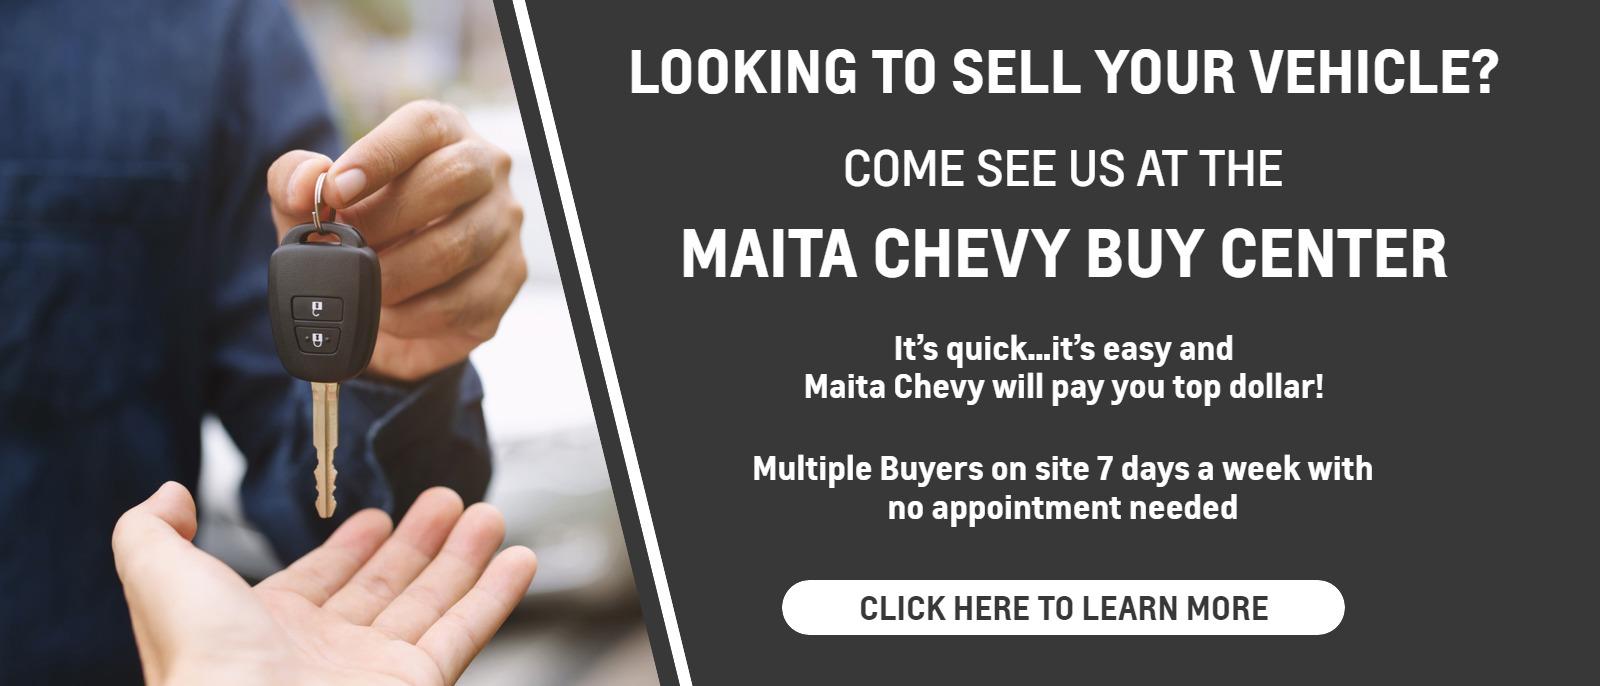 COME SEE US AT THE
MAITA CHEVY BUY CENTER
It’s quick…it’s easy and
Maita Chevy will pay you top dollar!

Multiple Buyers on site 7 days a week with no appointment needed